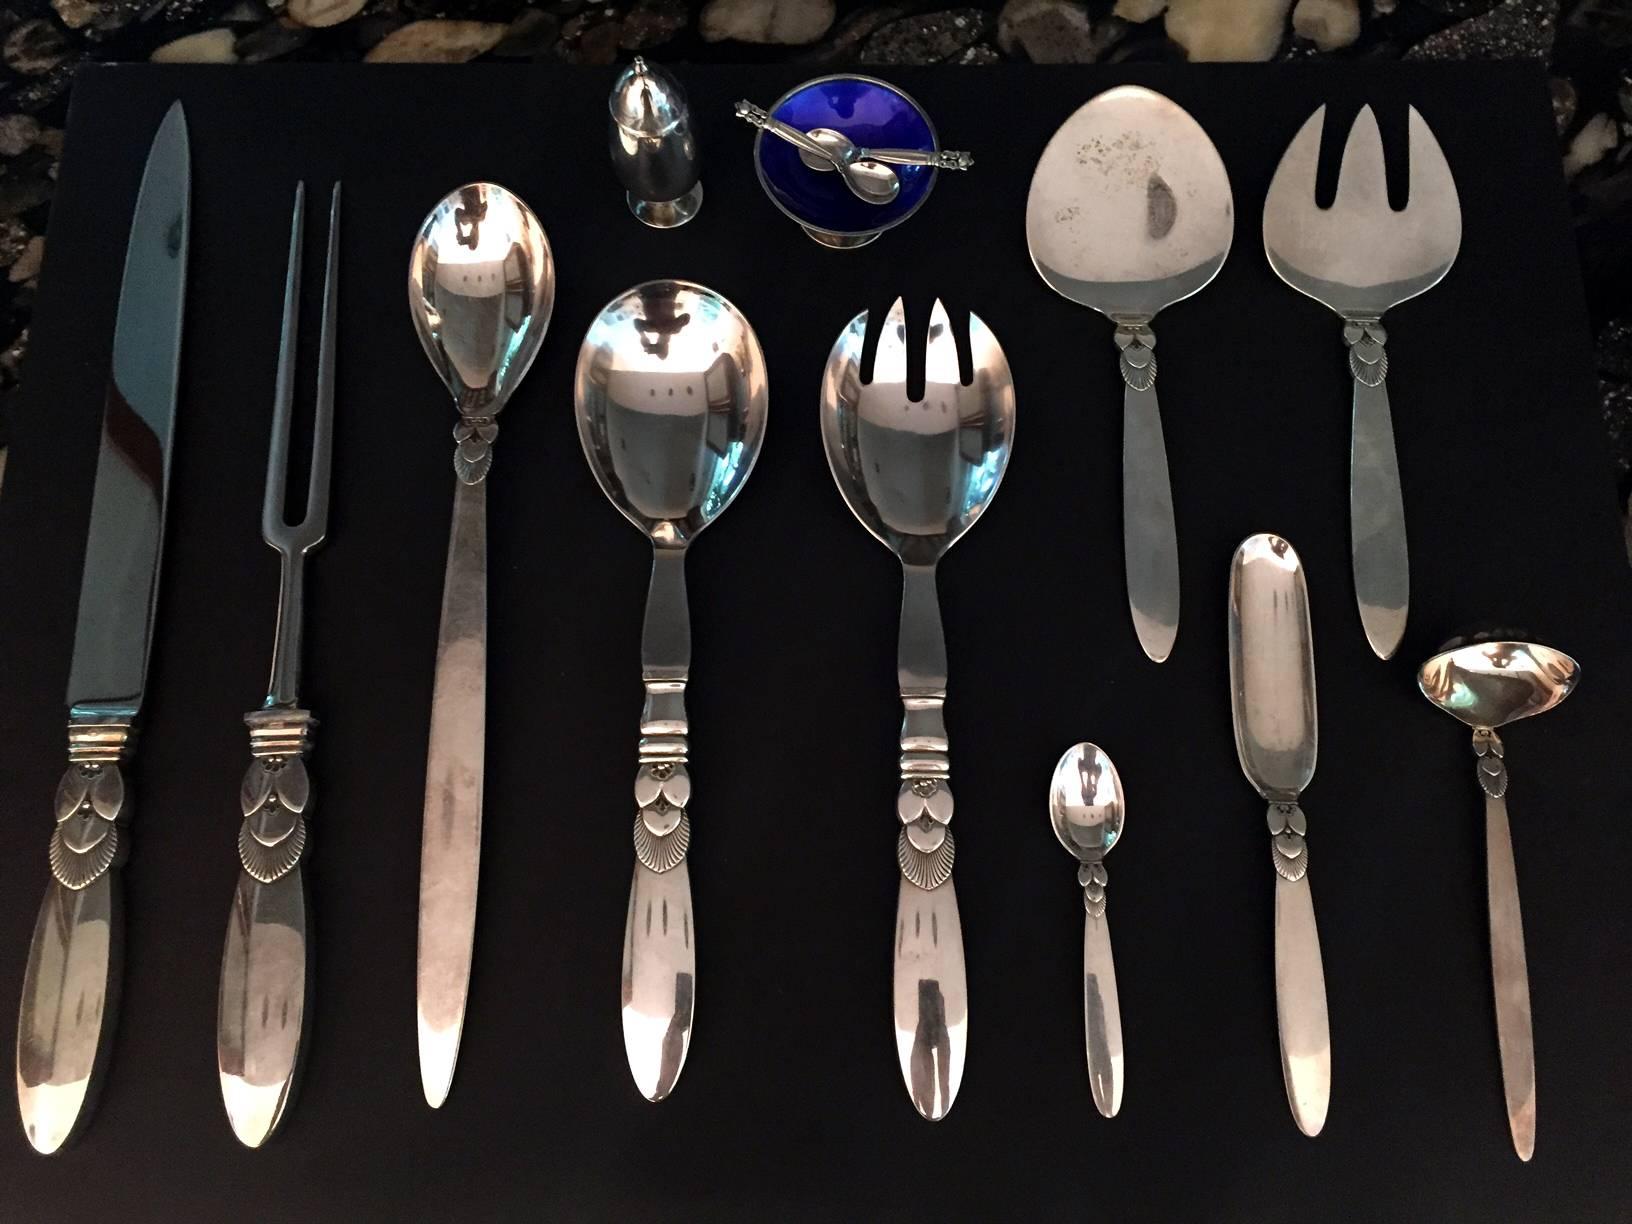 An extensive sterling silver set in cactus pattern designed by Gundolph Albertus in 1930 for Georg Jensen. One of the most elegant designs from the esteemed Danish Silversmith.
This is an extraordinary large set that include a nice piece place